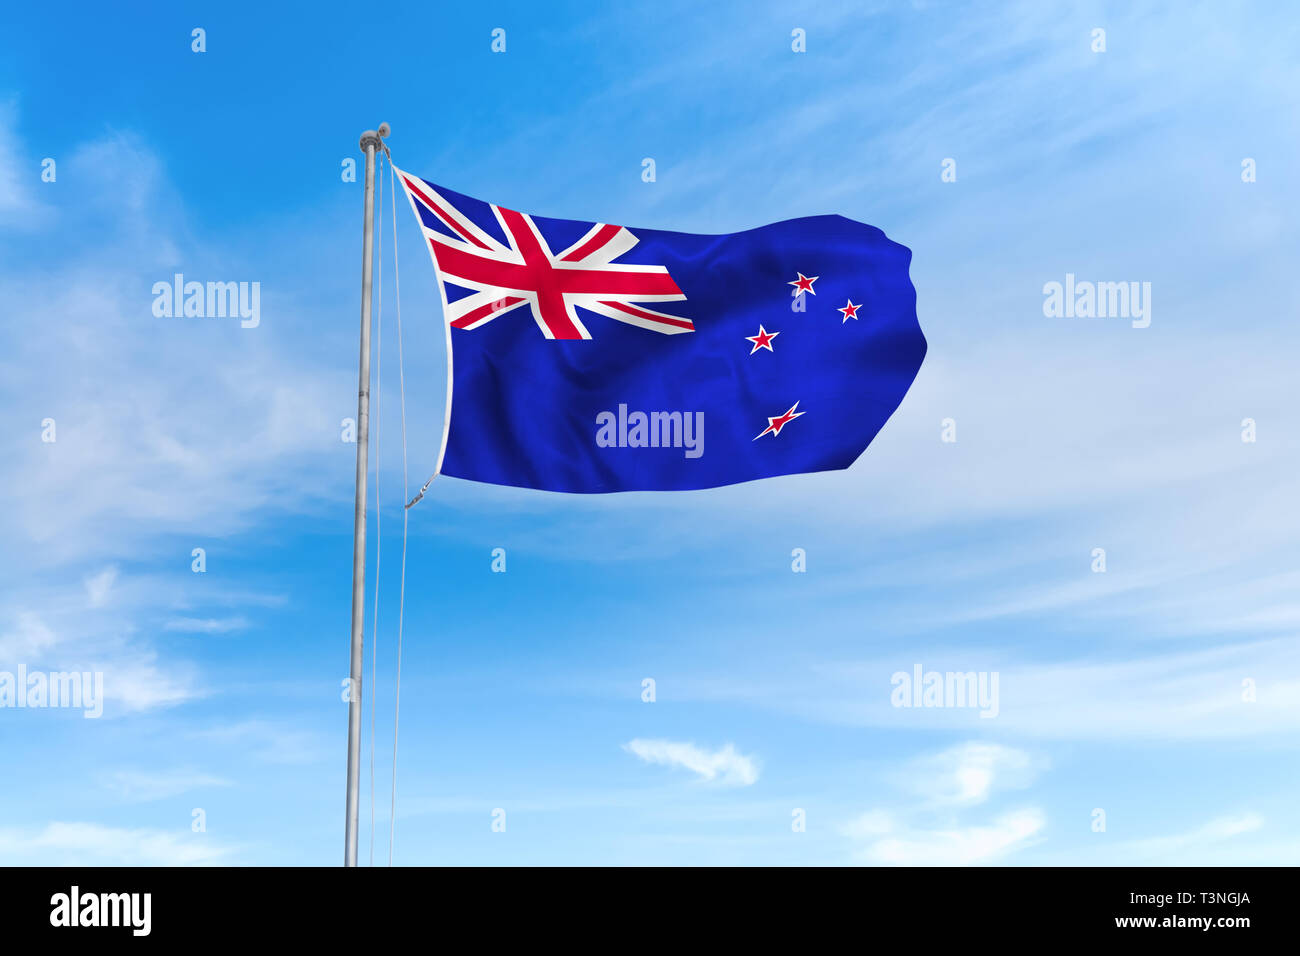 New Zealand flag blowing in the wind over nice blue sky background Stock Photo